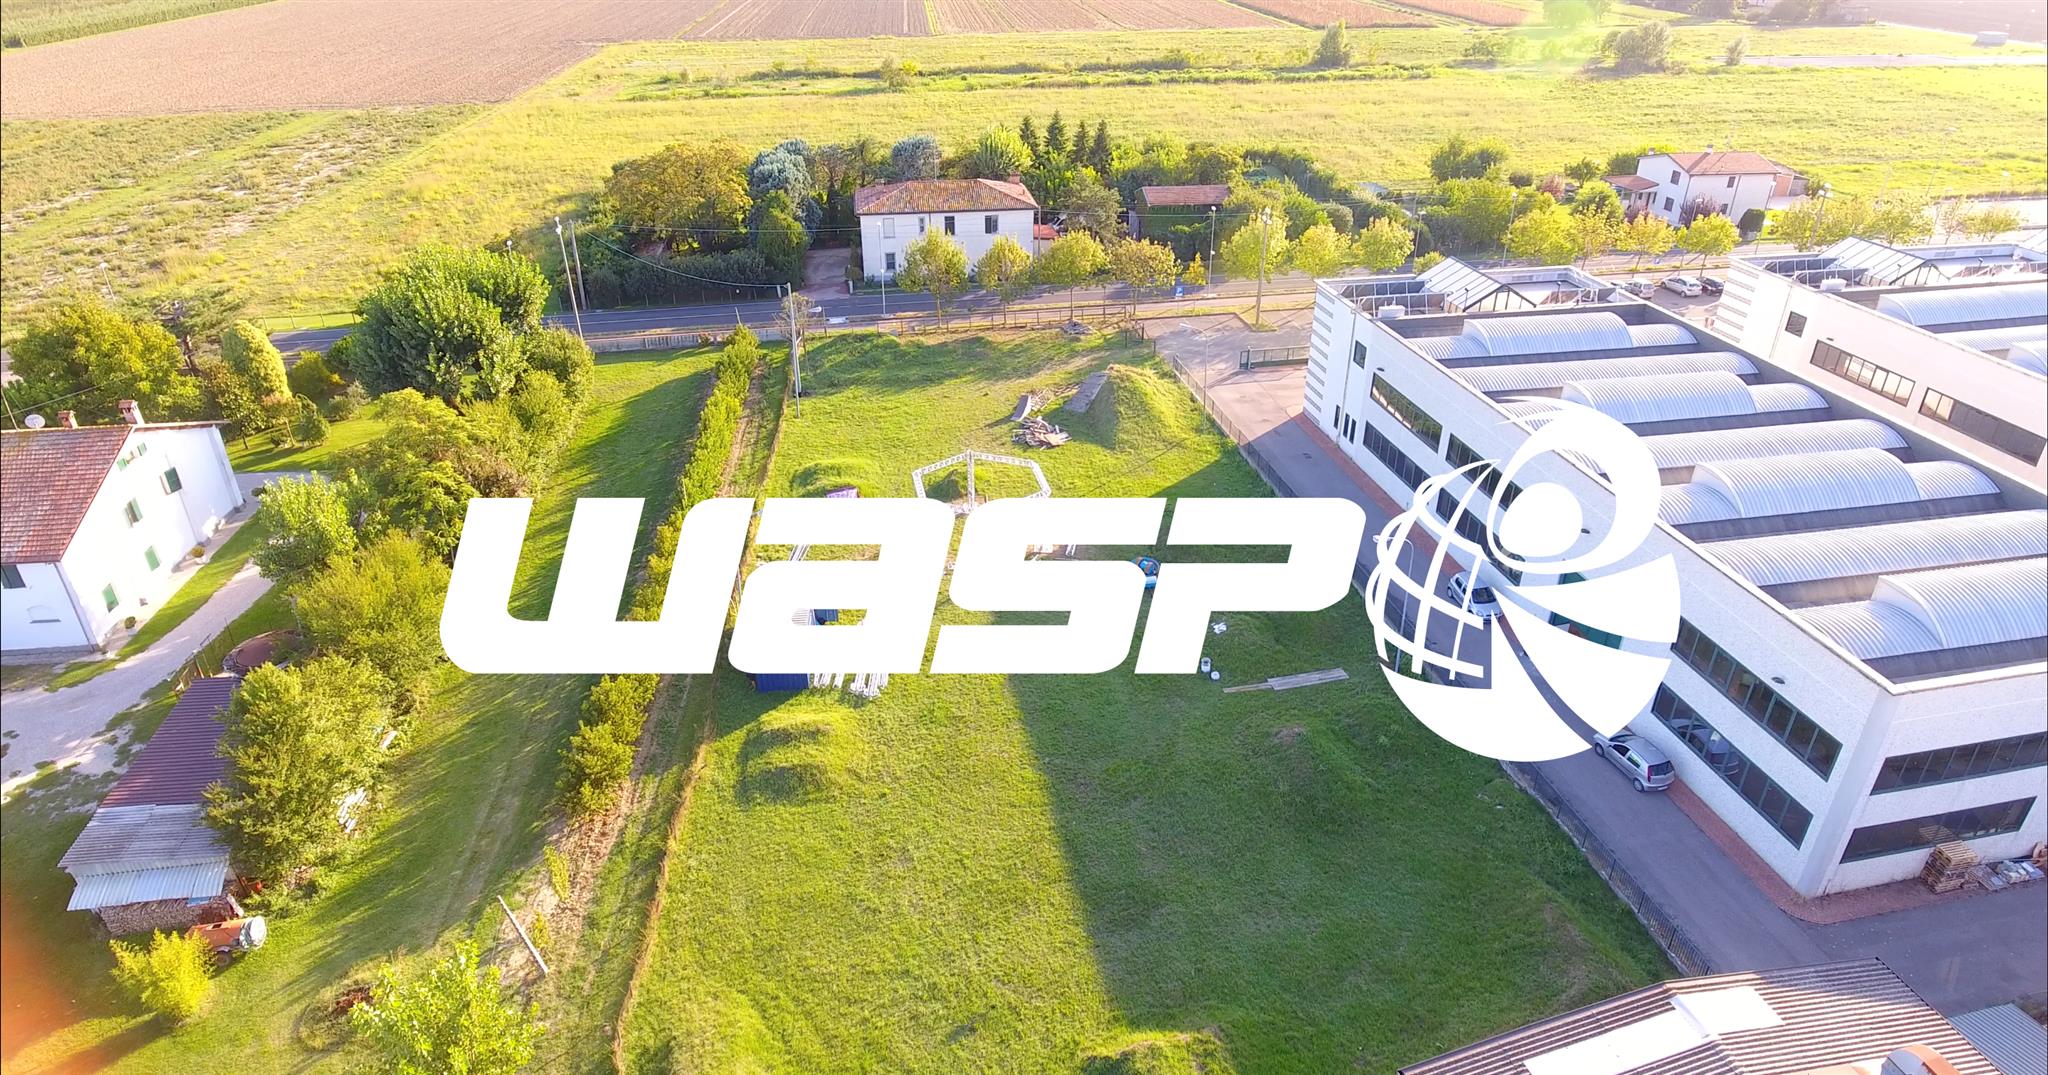 WASP headquarters in Italy. Image via WASP